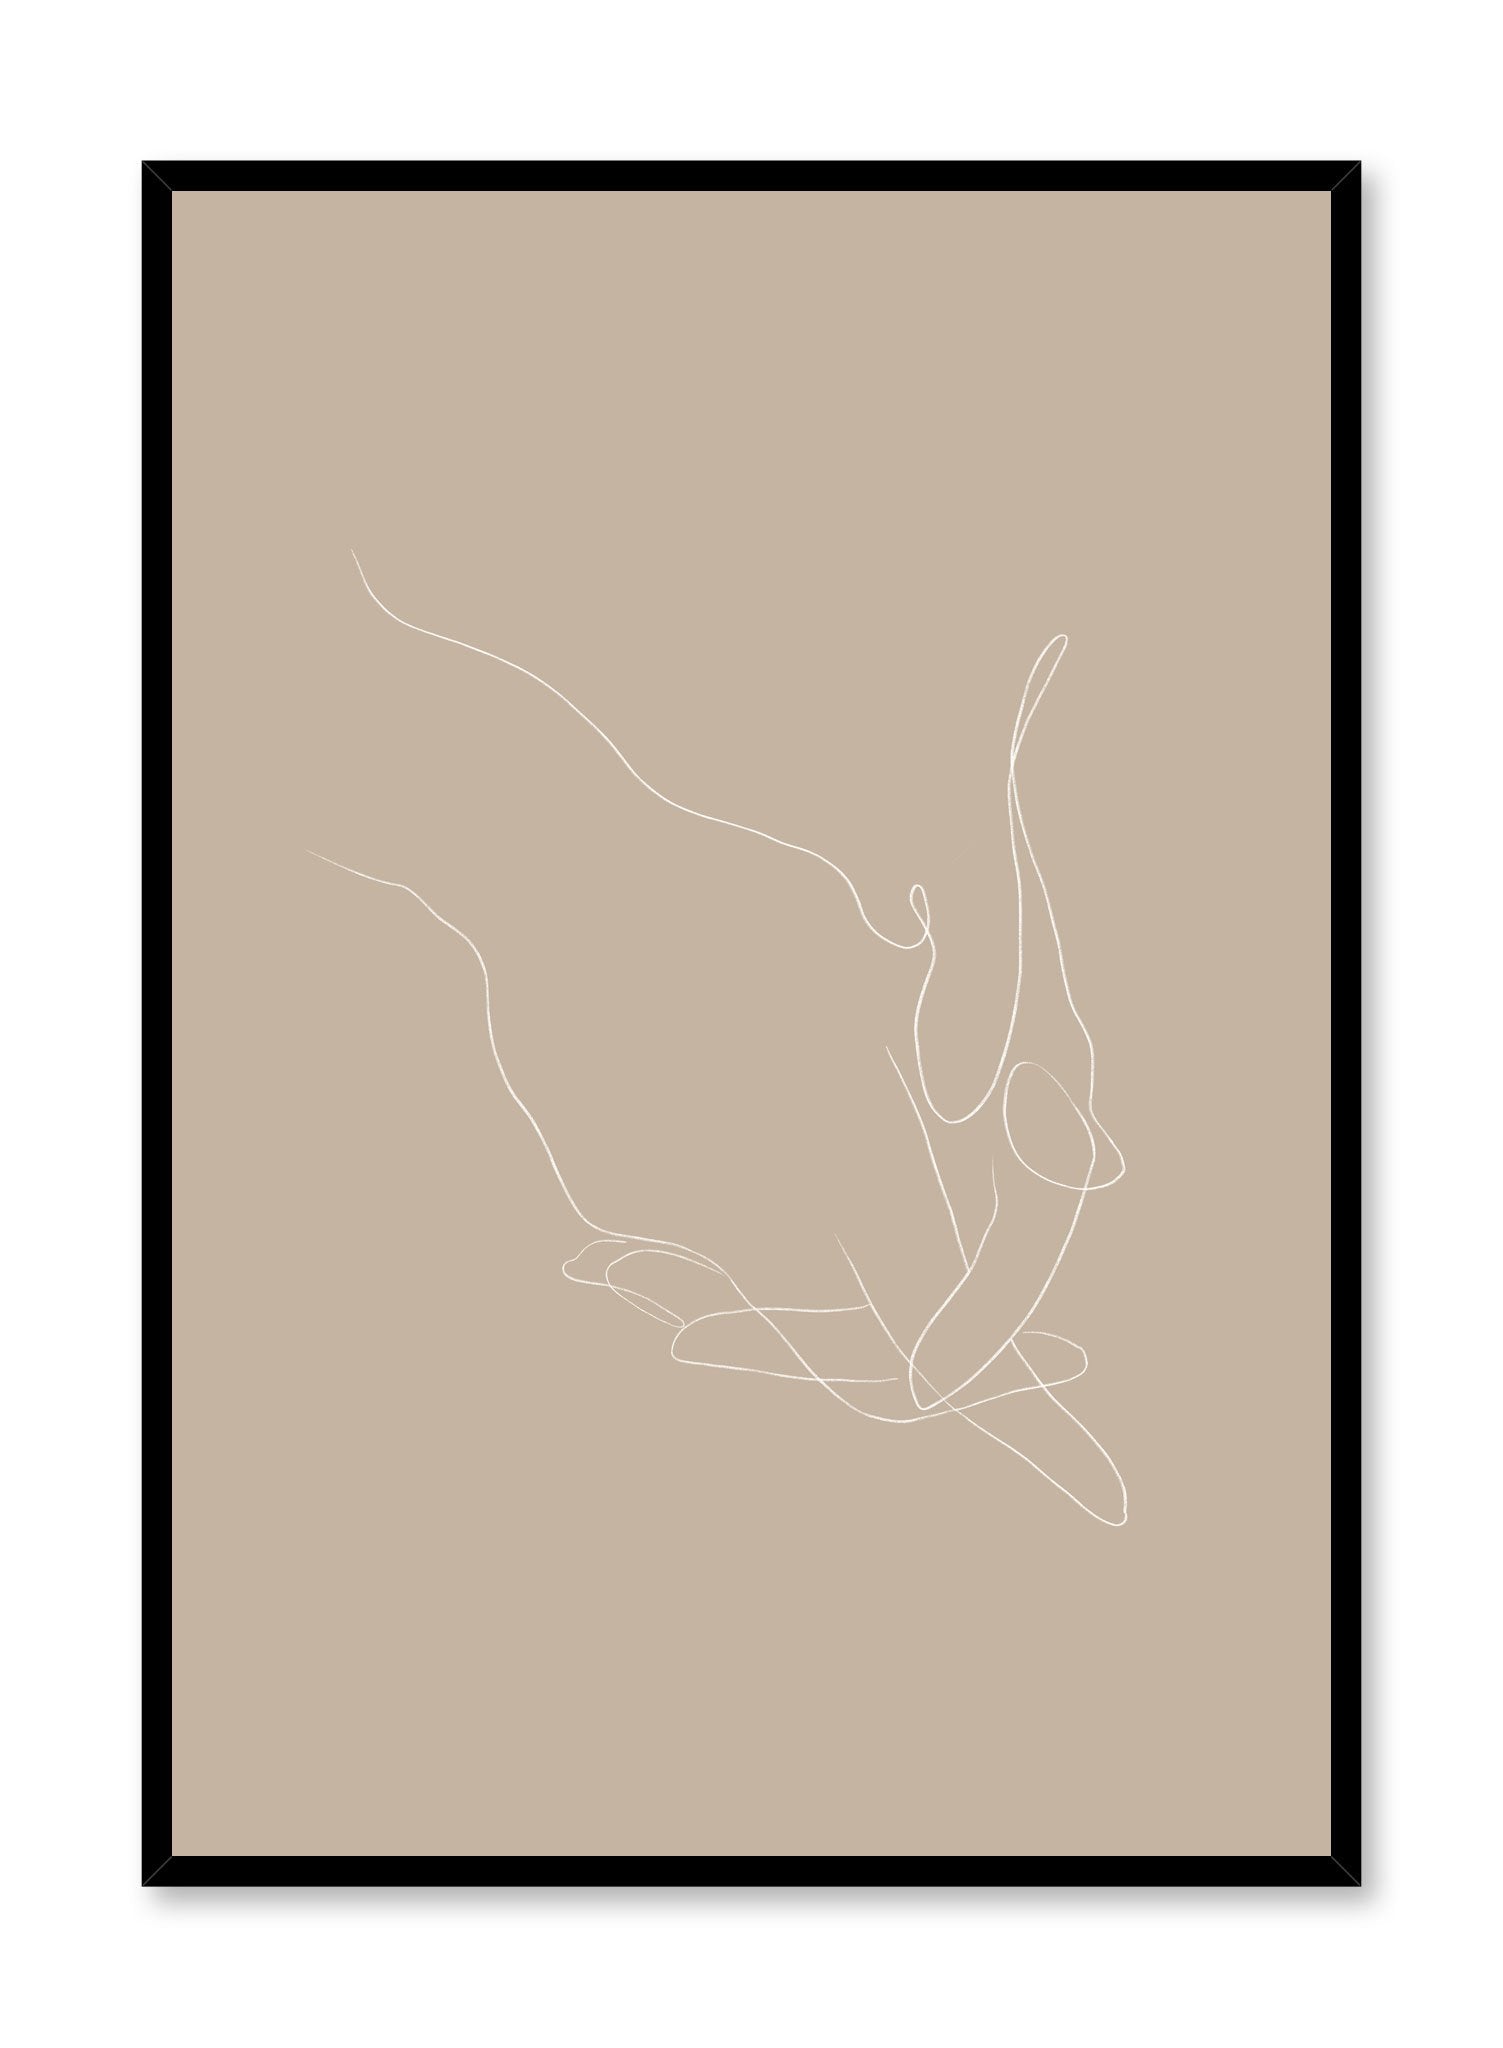 Modern minimalist poster by Opposite Wall with abstract illustration of holding hands line art and beige background